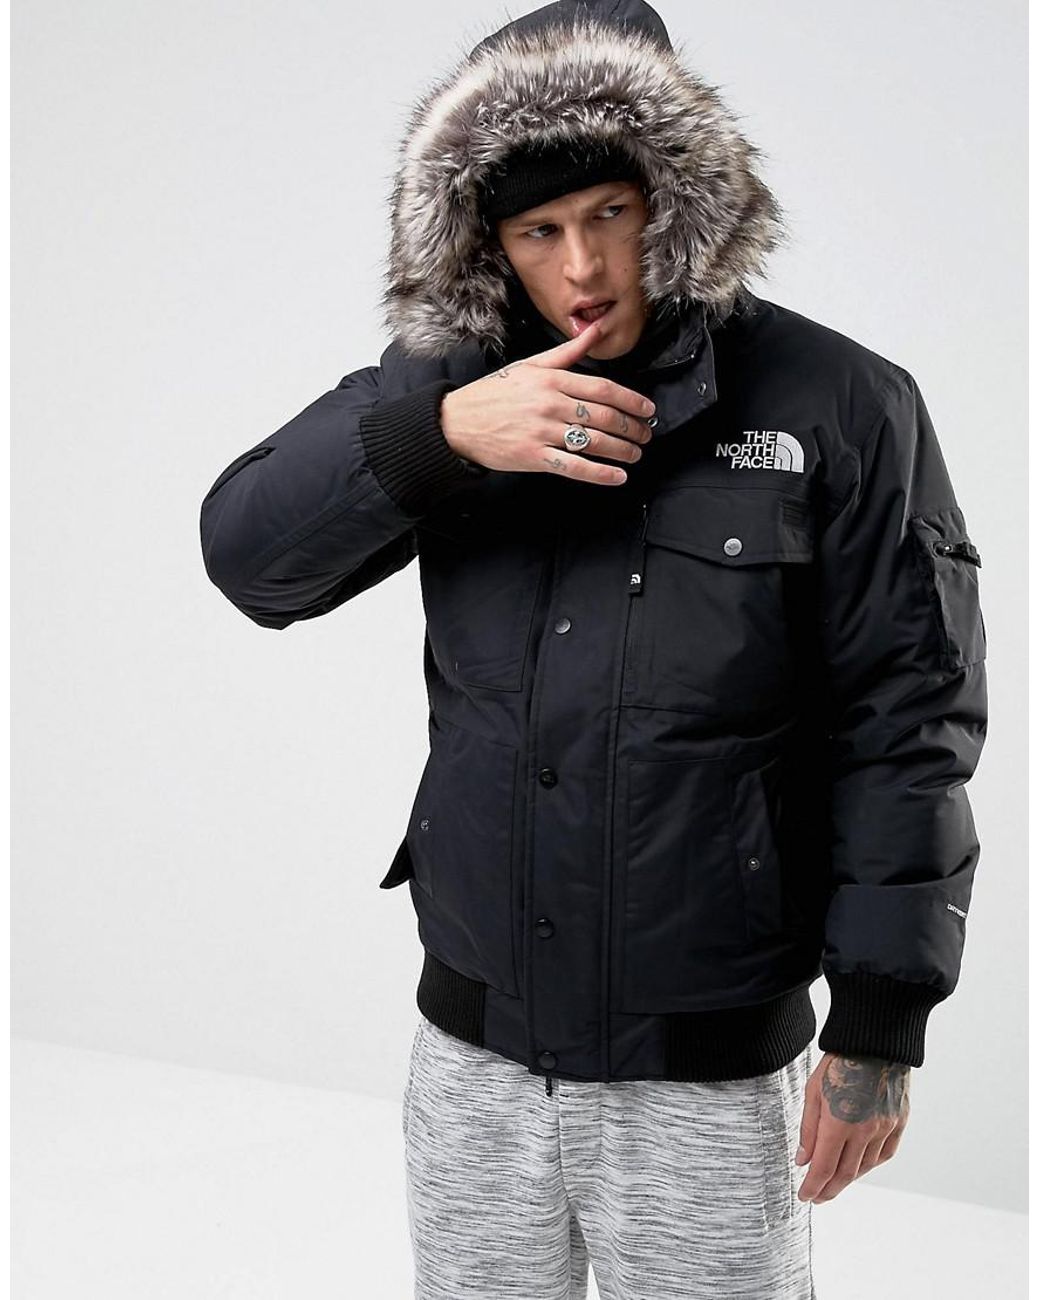 The North Face Bomber Jacket Detachable Hood In Black for Men | Lyst